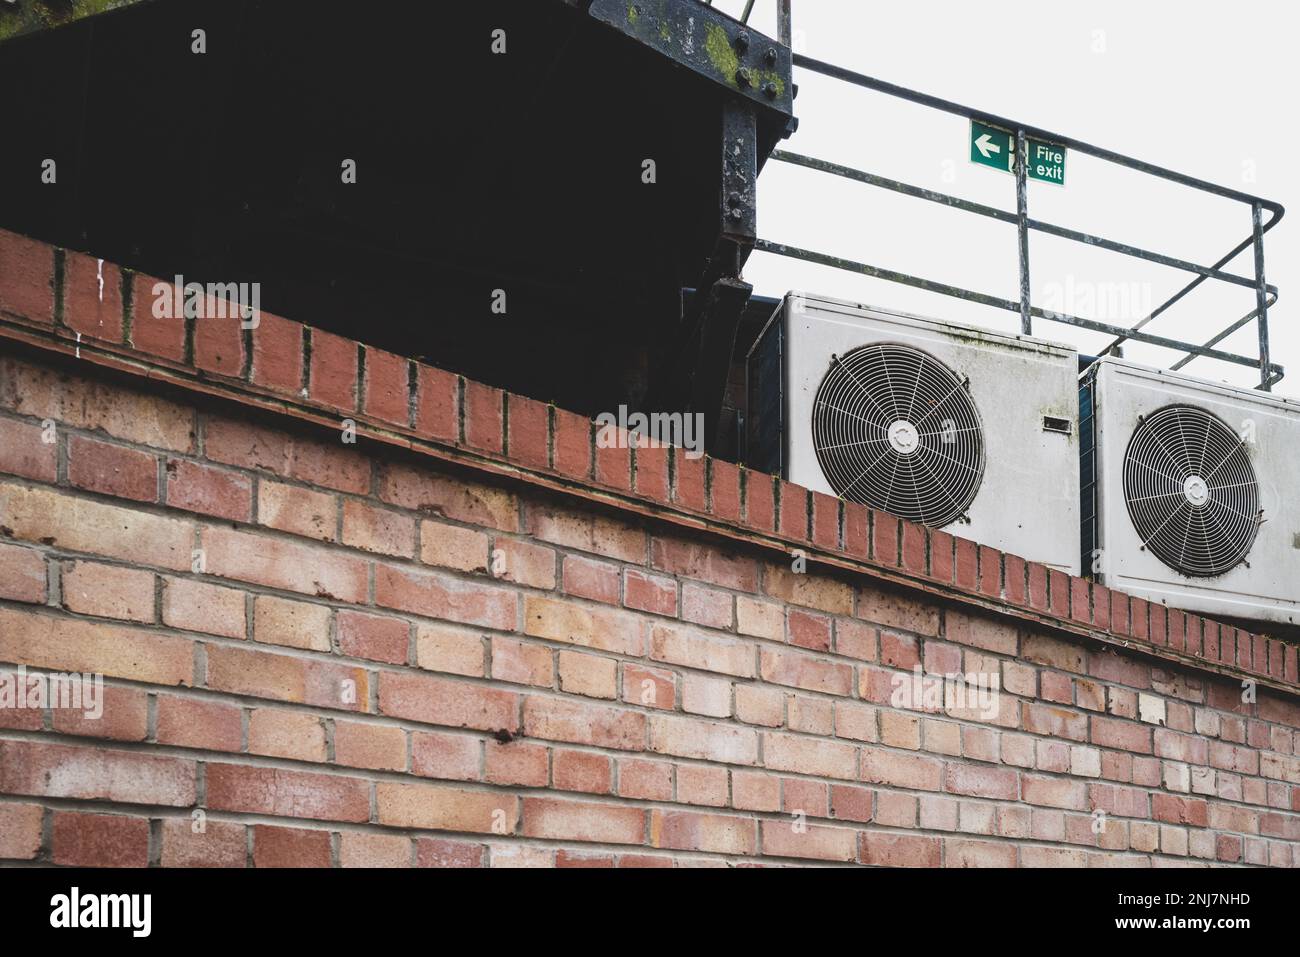 Pair of office air conditioning units seen perched atop a brick wall. A fire exit sign and gantry is seen directly above. Stock Photo